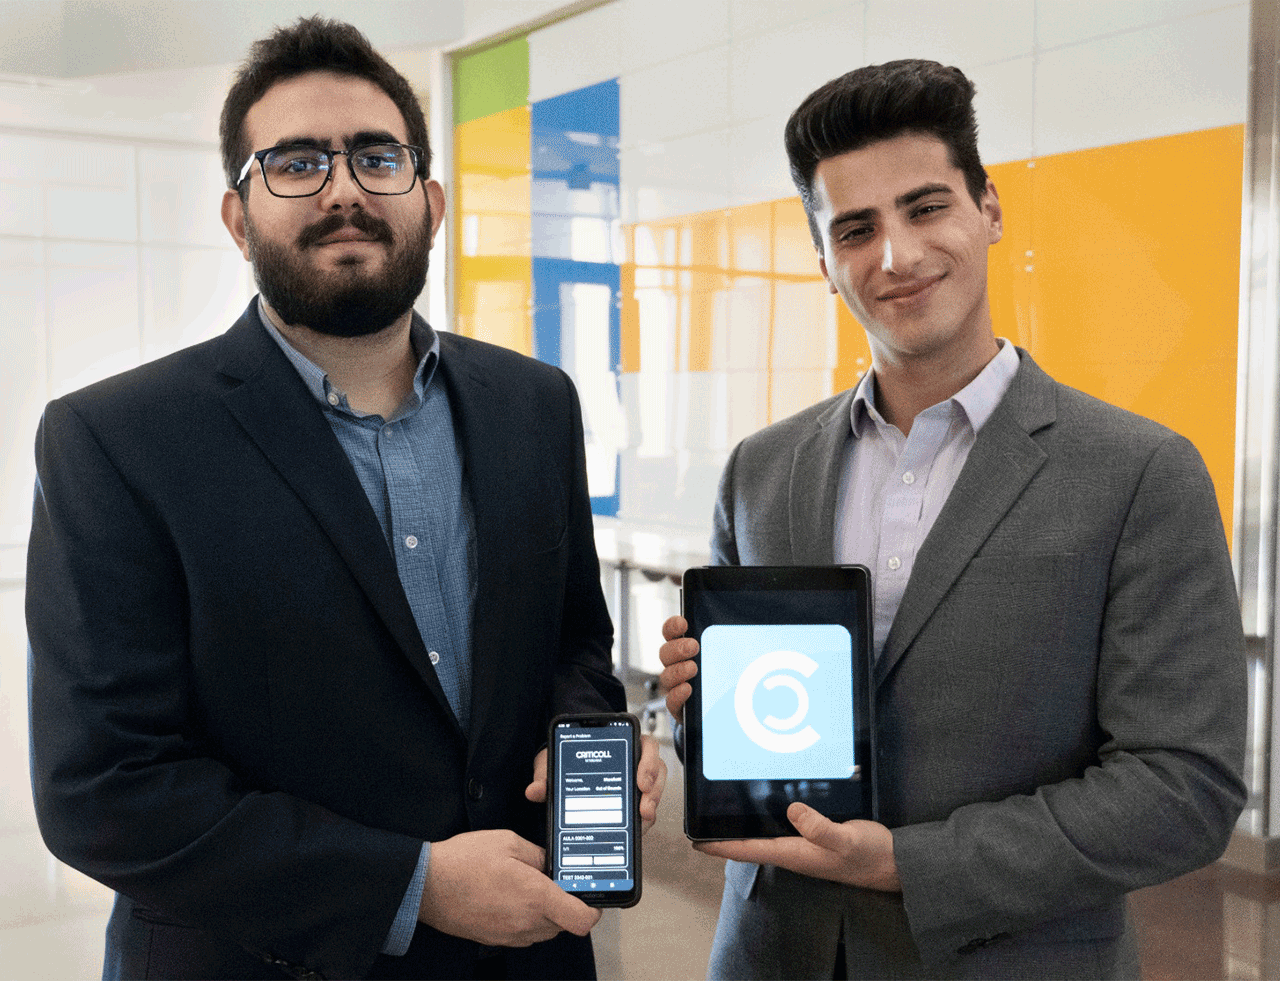 Pedro Marafiotti and Matheus Pagotti win an award from the Texas Tech University Innovation Hub for their new business, CritiColl